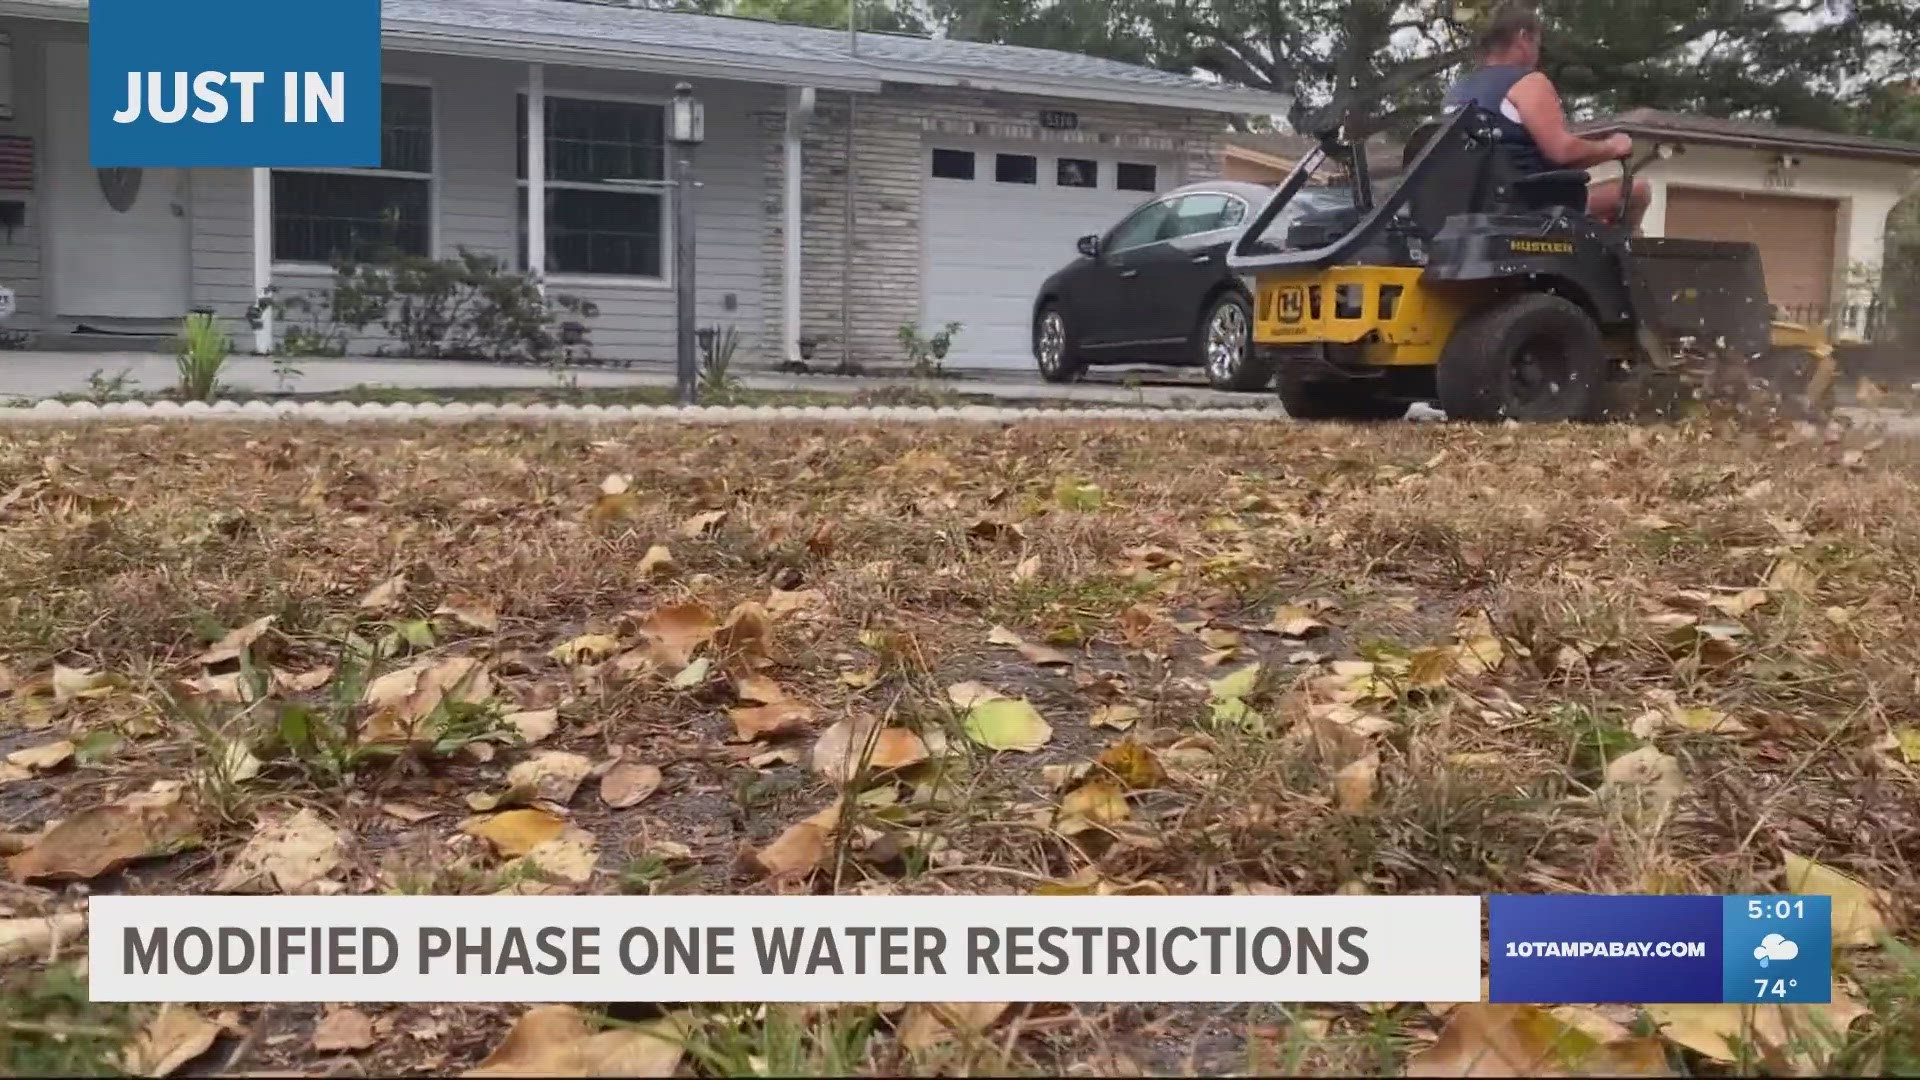 People living in Hillsborough, Pasco and Pinellas counties will only be allowed to water their lawns once a week starting next month.